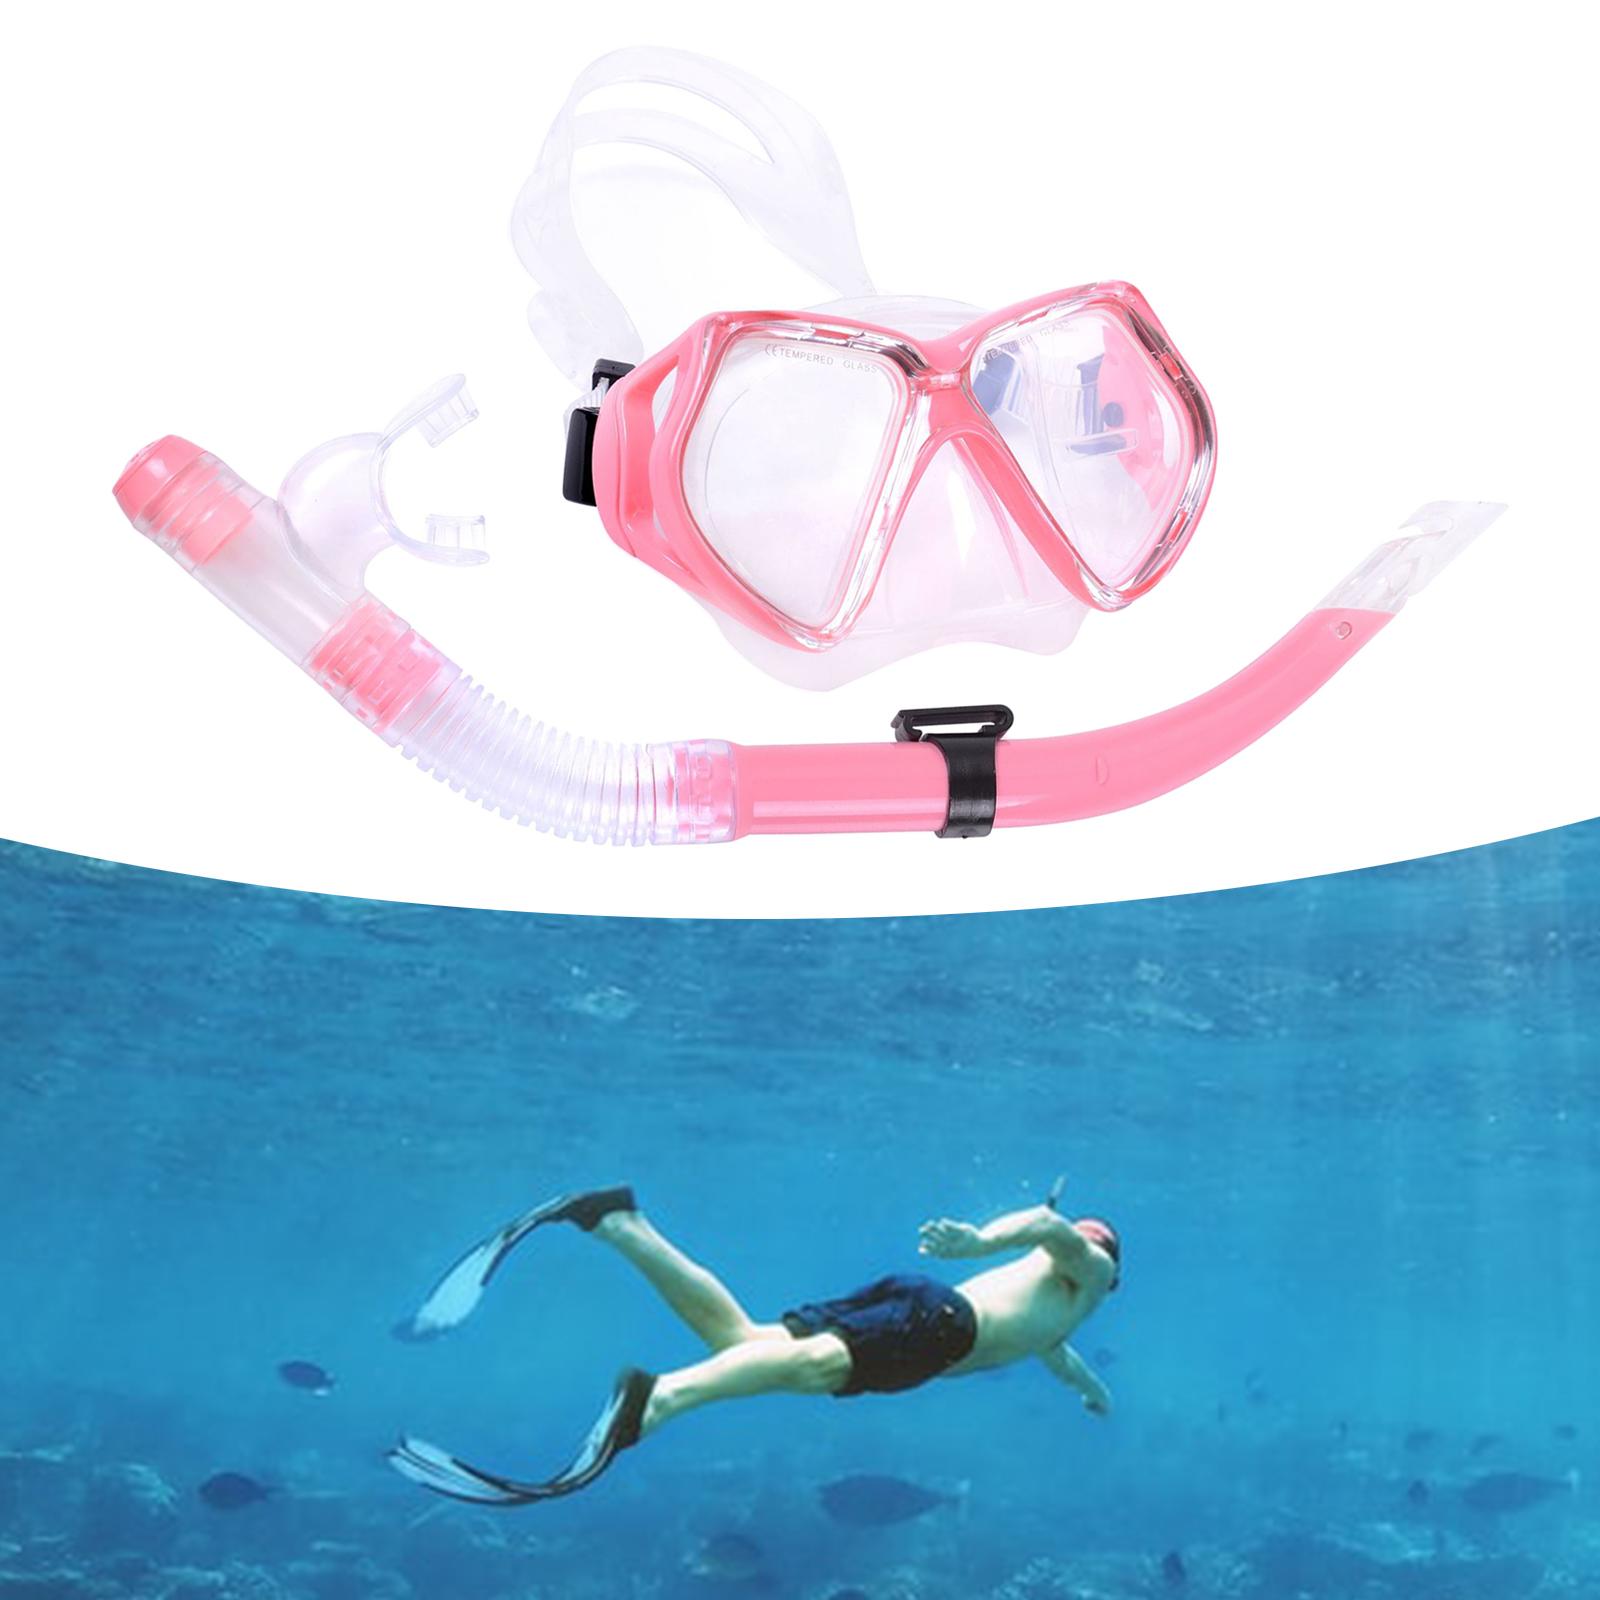 Snorkel Set Dive Mask Snorkeling Gear Diving Tempered Glass Goggles Swimming Pink